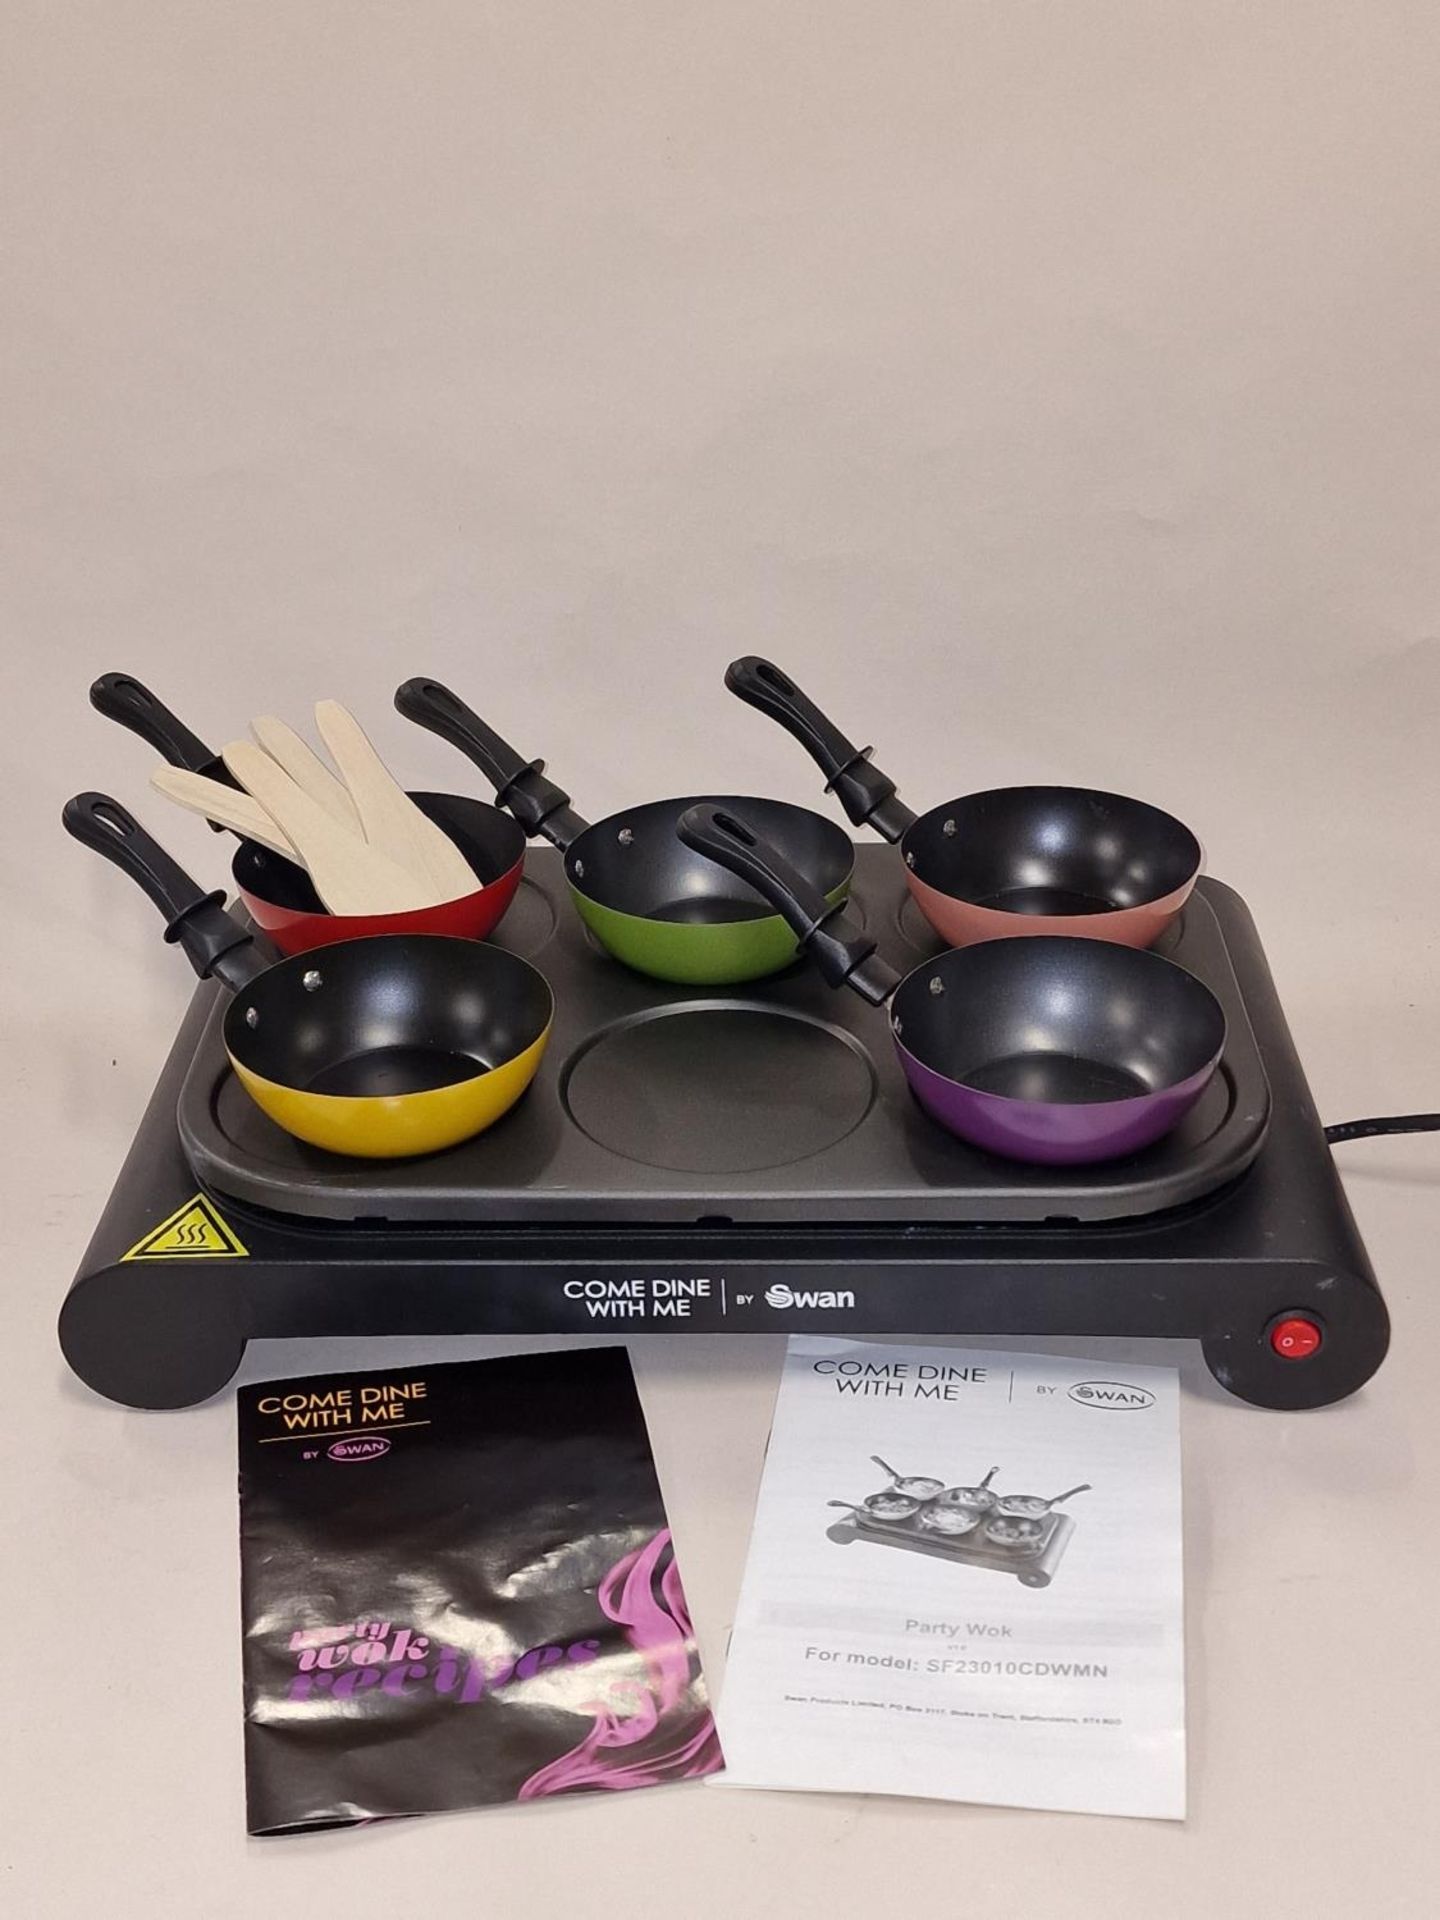 A come dine with me Party Wok with Pans and wooden utensils and manuals.